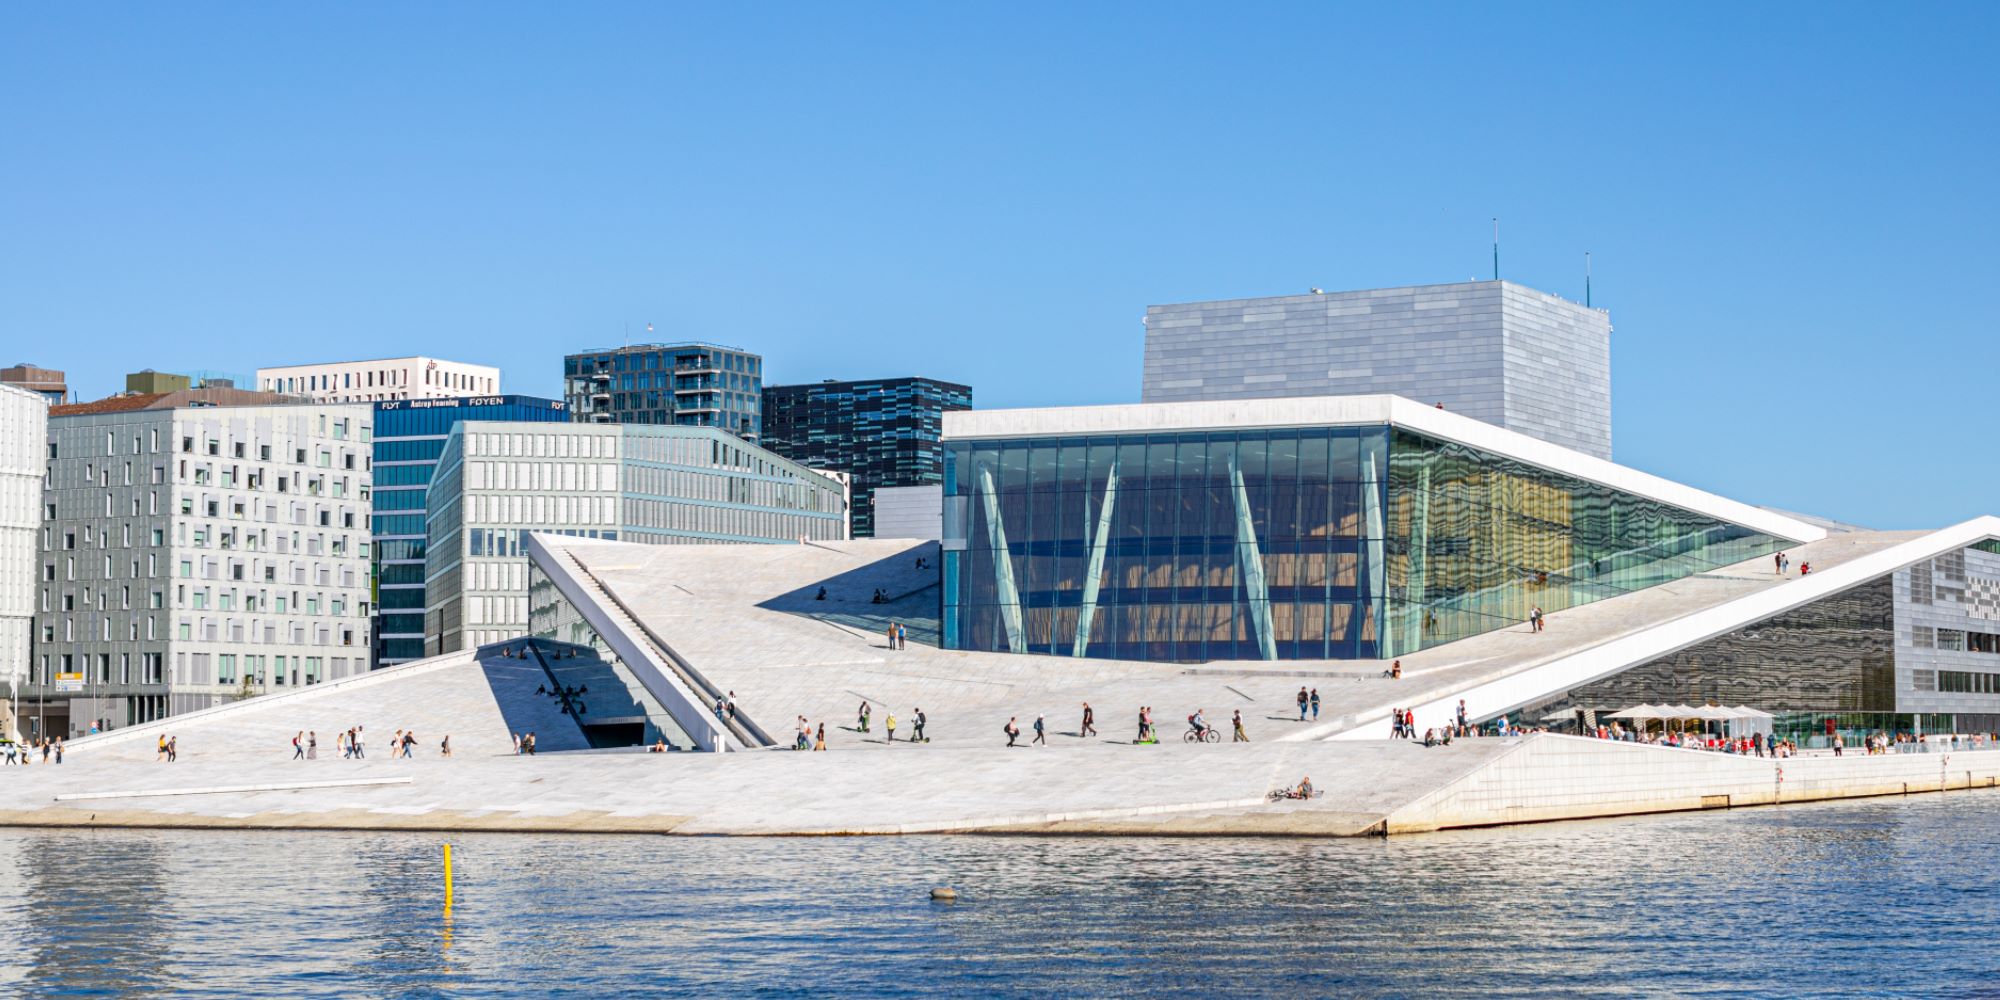 8-captivating-facts-about-oslo-opera-house